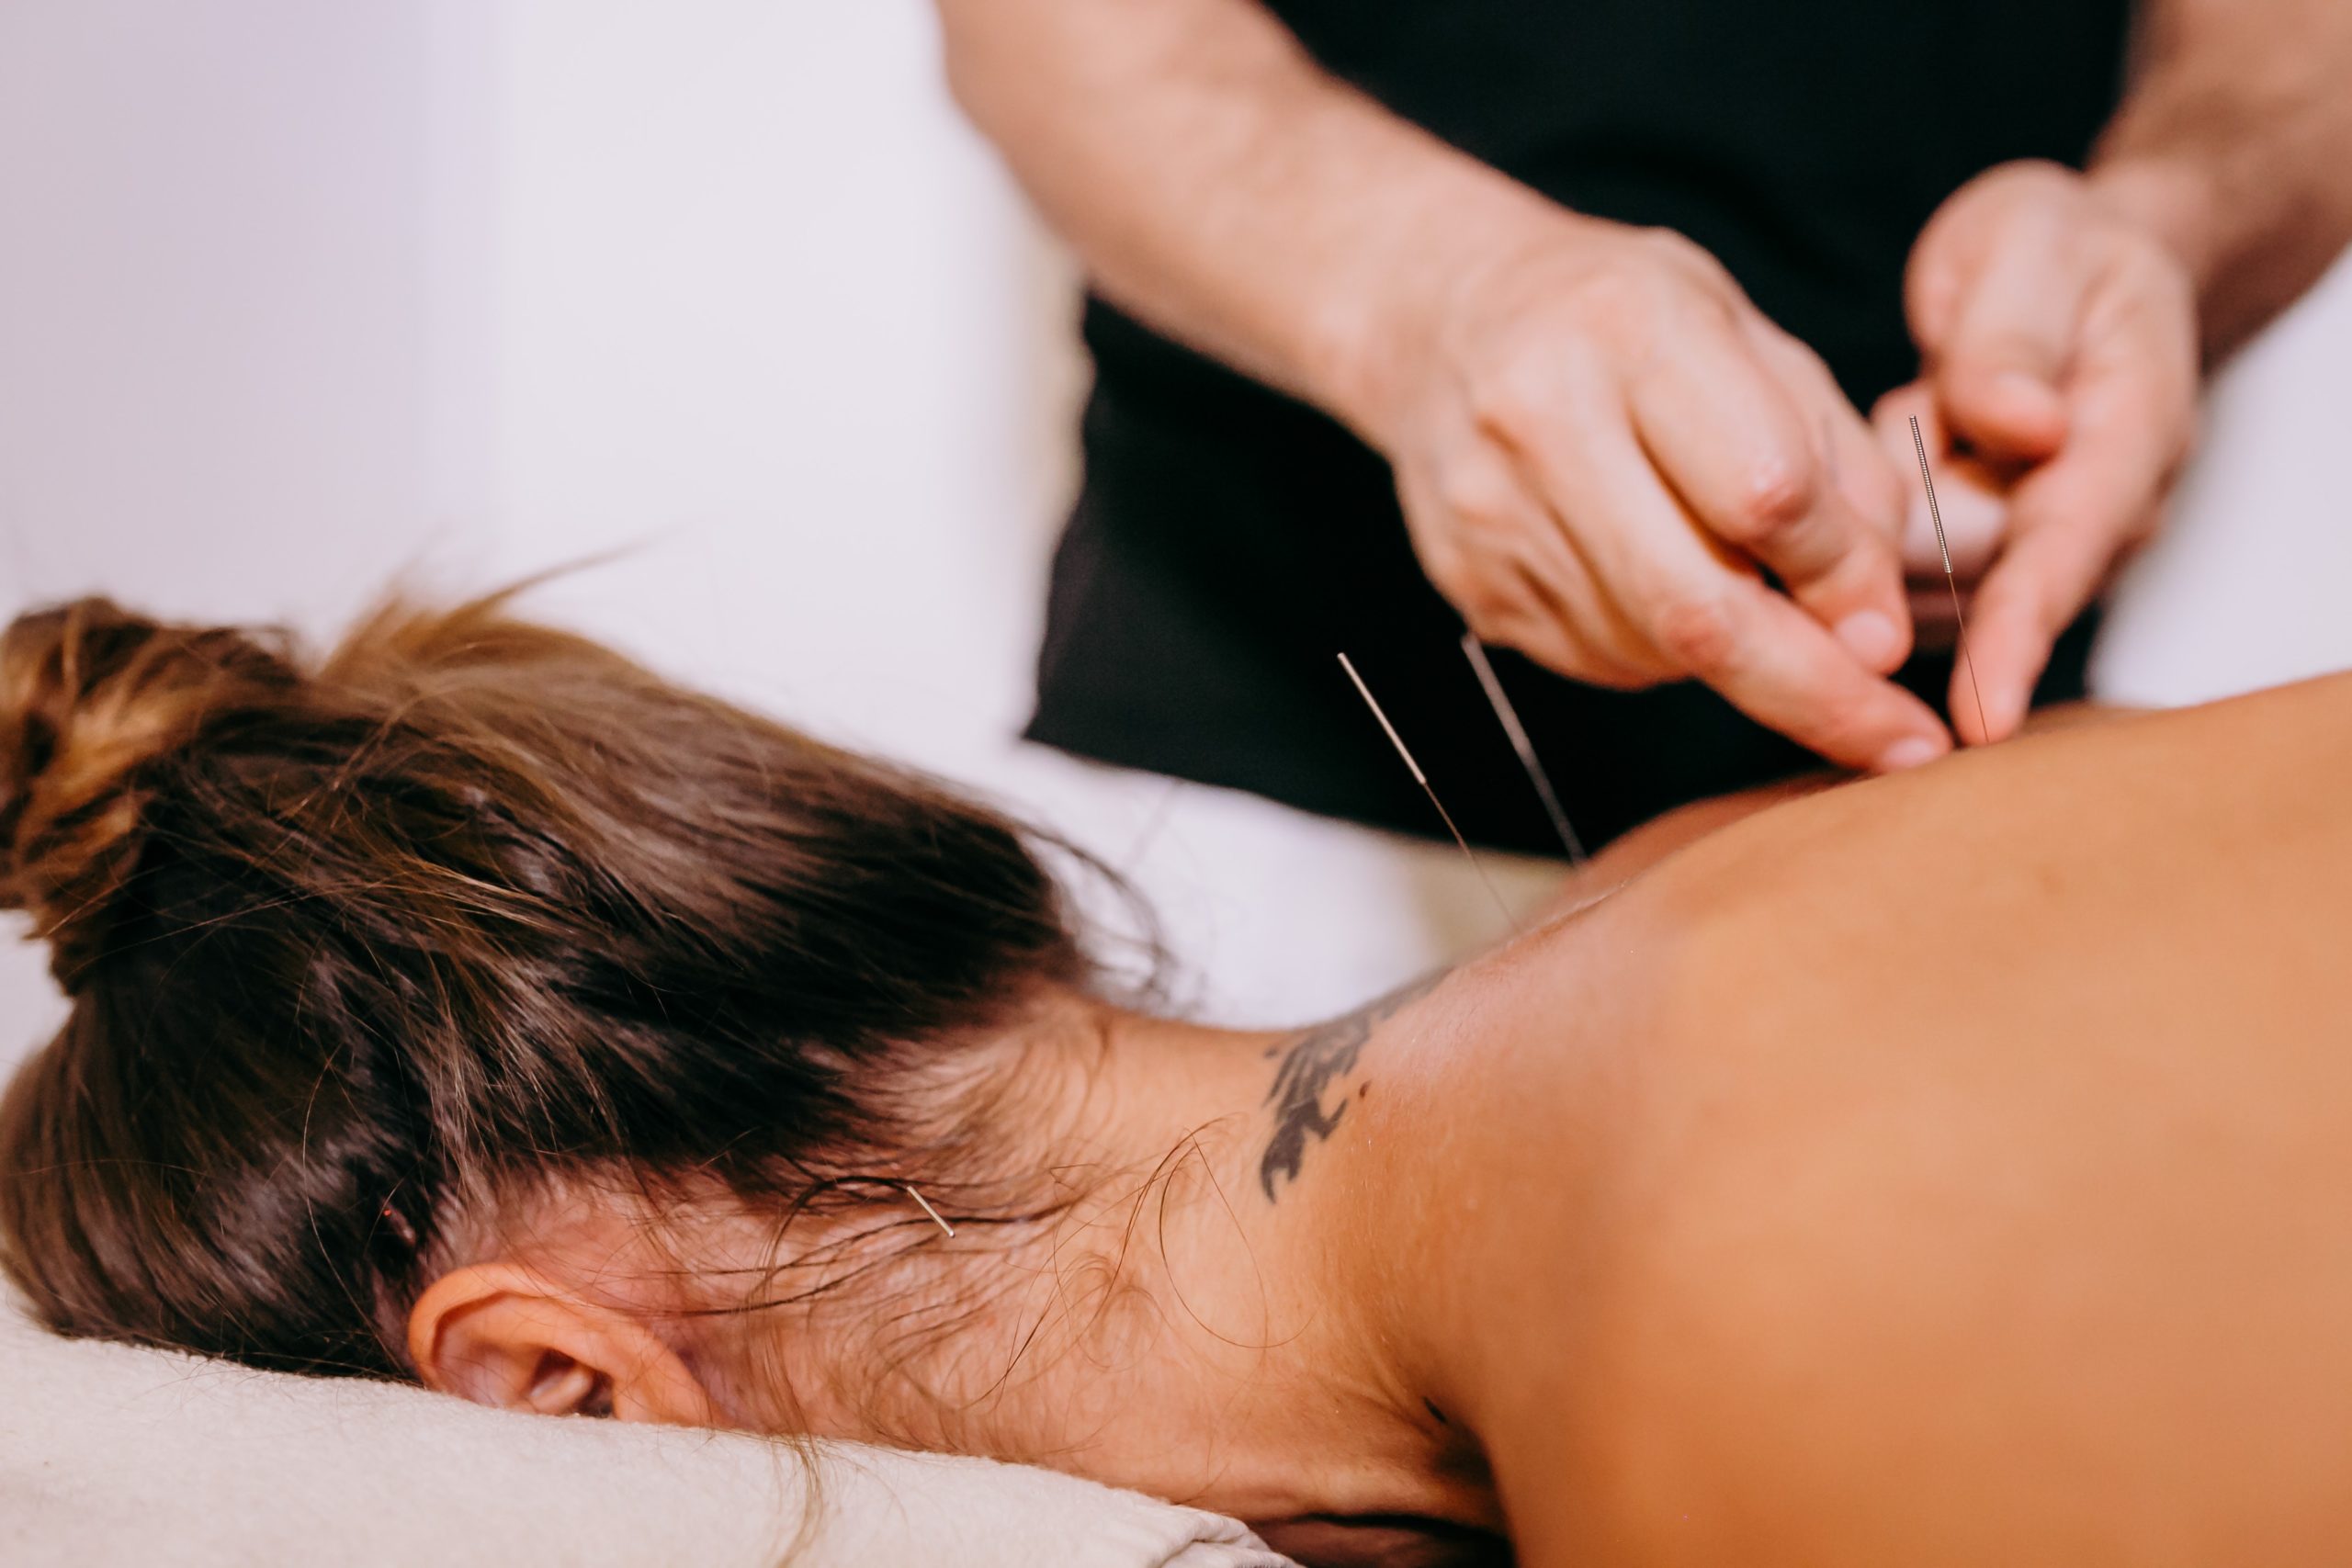 Acupuncture for pinched nerves